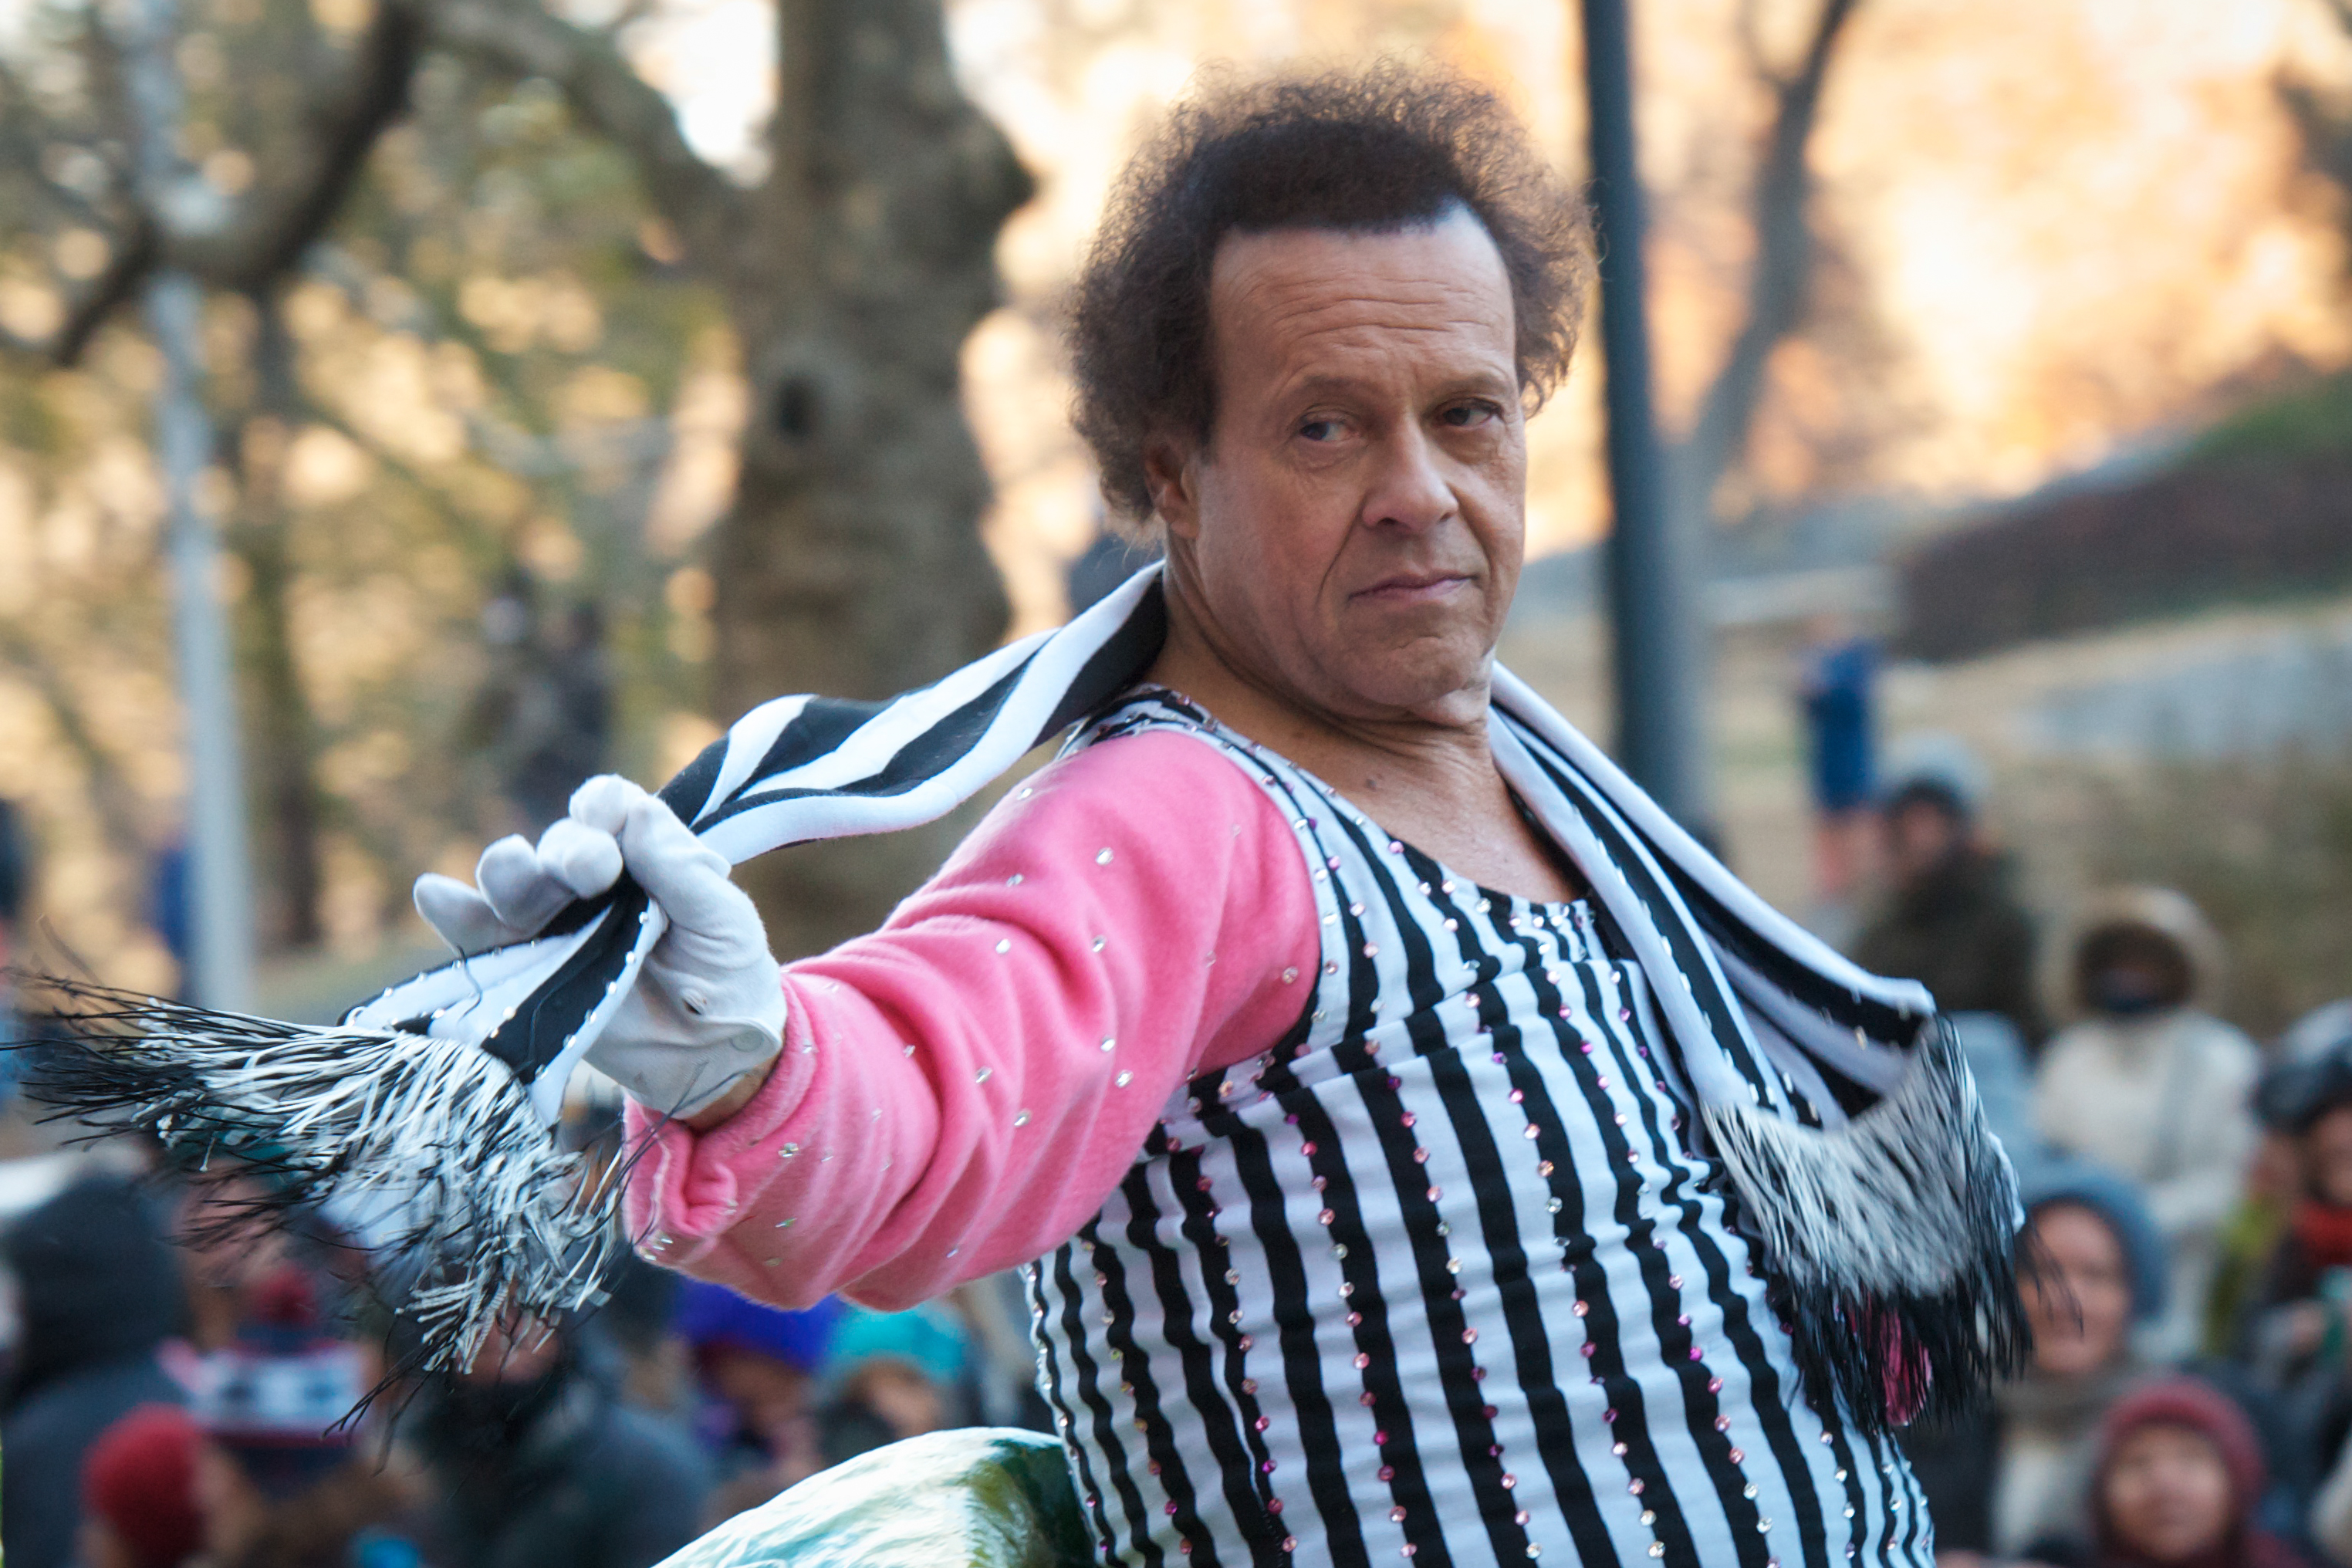 Richard Simmons attends the 87th annual Macy's Thanksgiving Day parade on November 28, 2013, in New York City. | Source: Getty Images